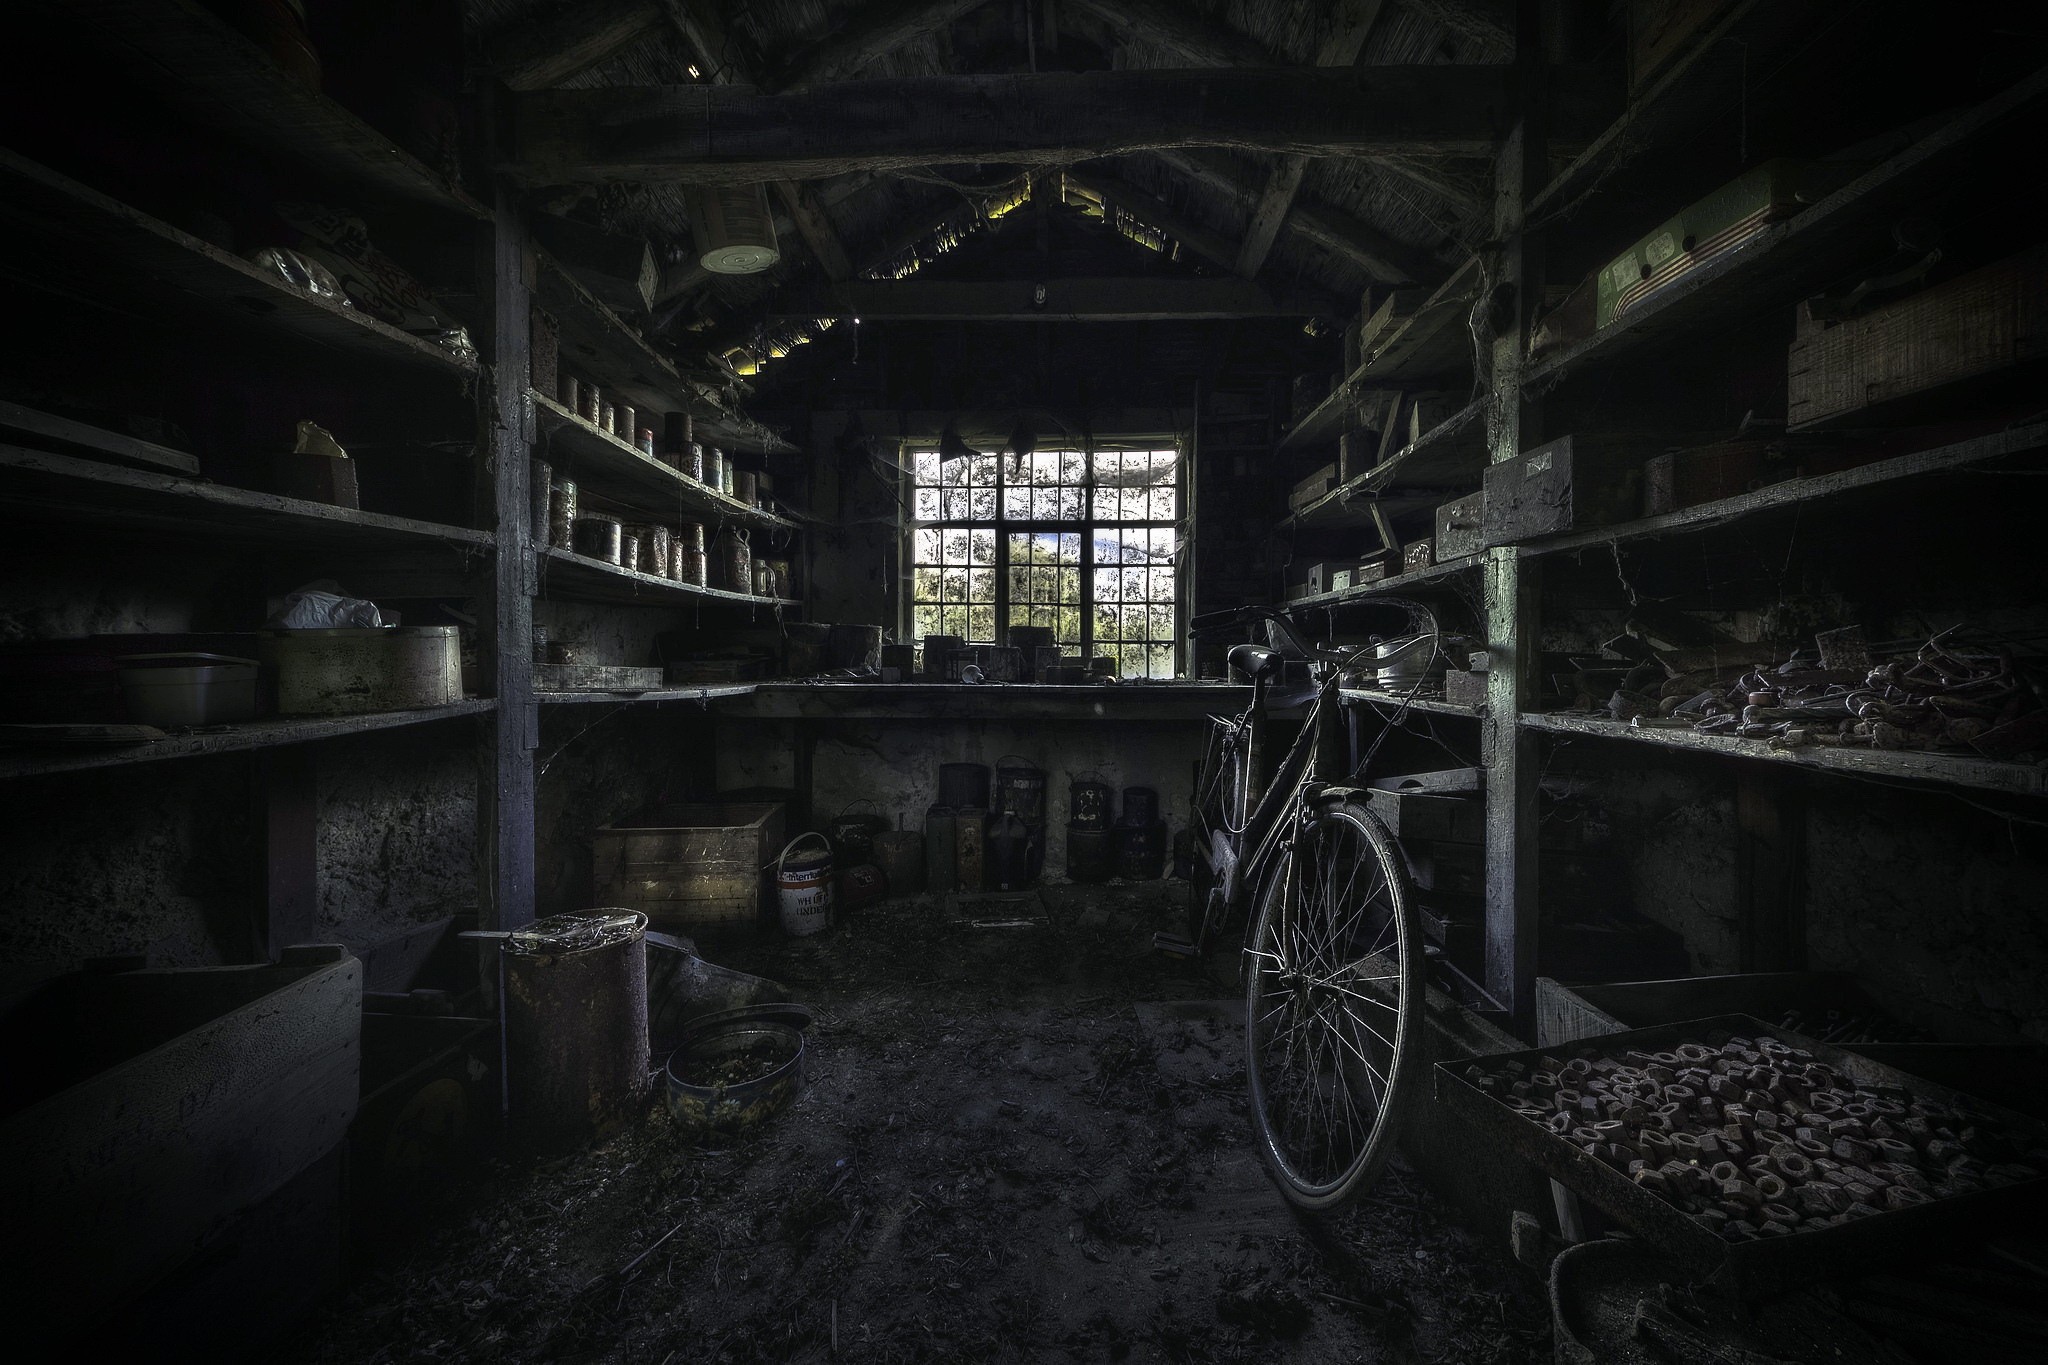 General 2048x1365 room interior old bicycle vehicle indoors low light